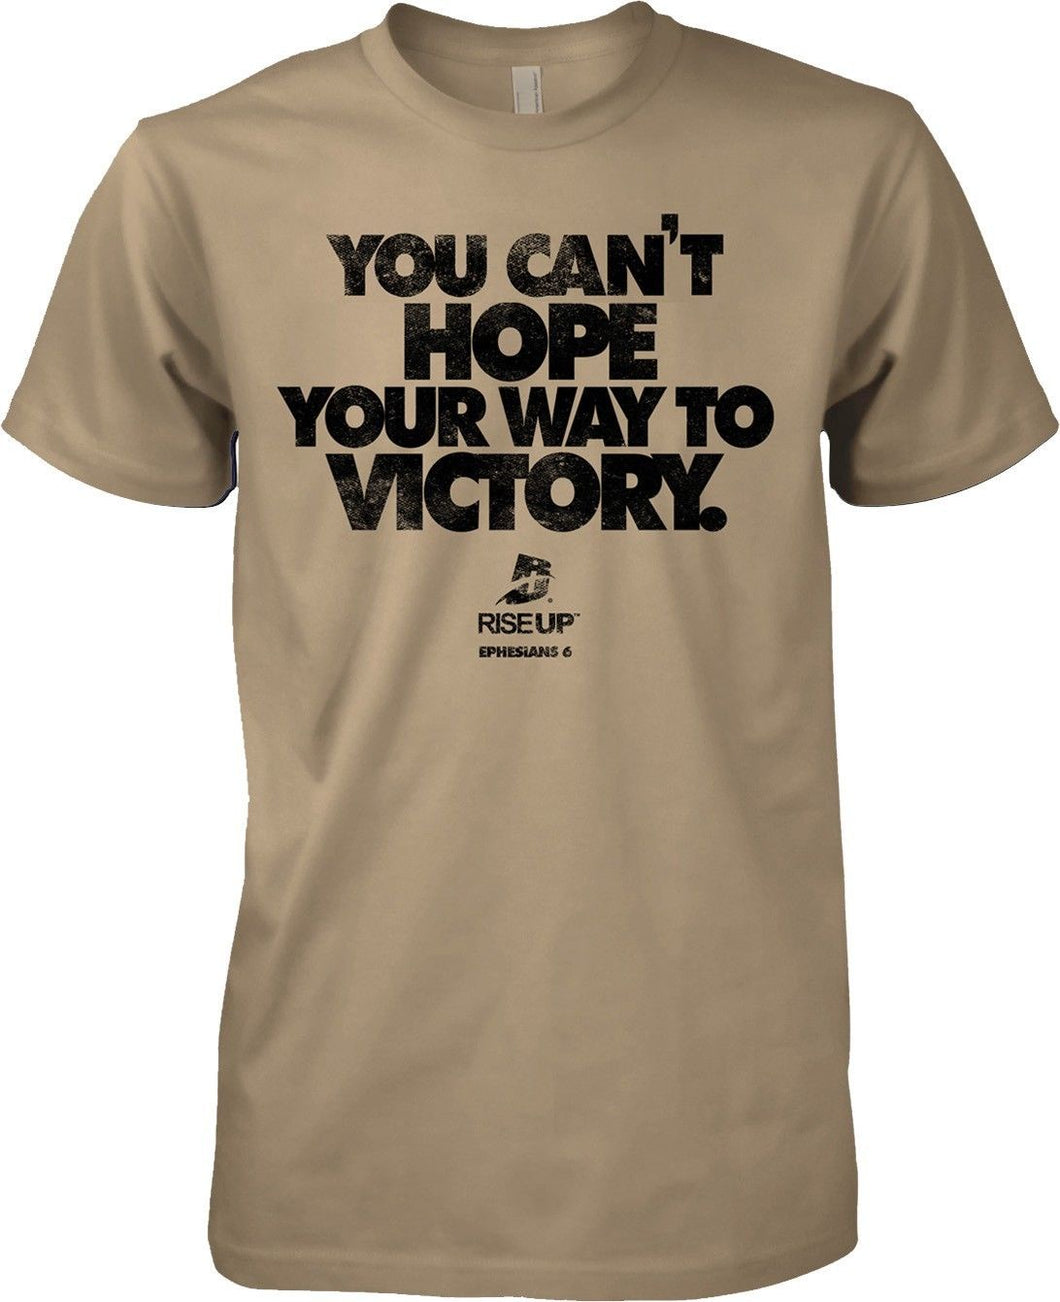 T-Shirt You Can't Hope Your Way To Victory Dry-Fit Desert Sand